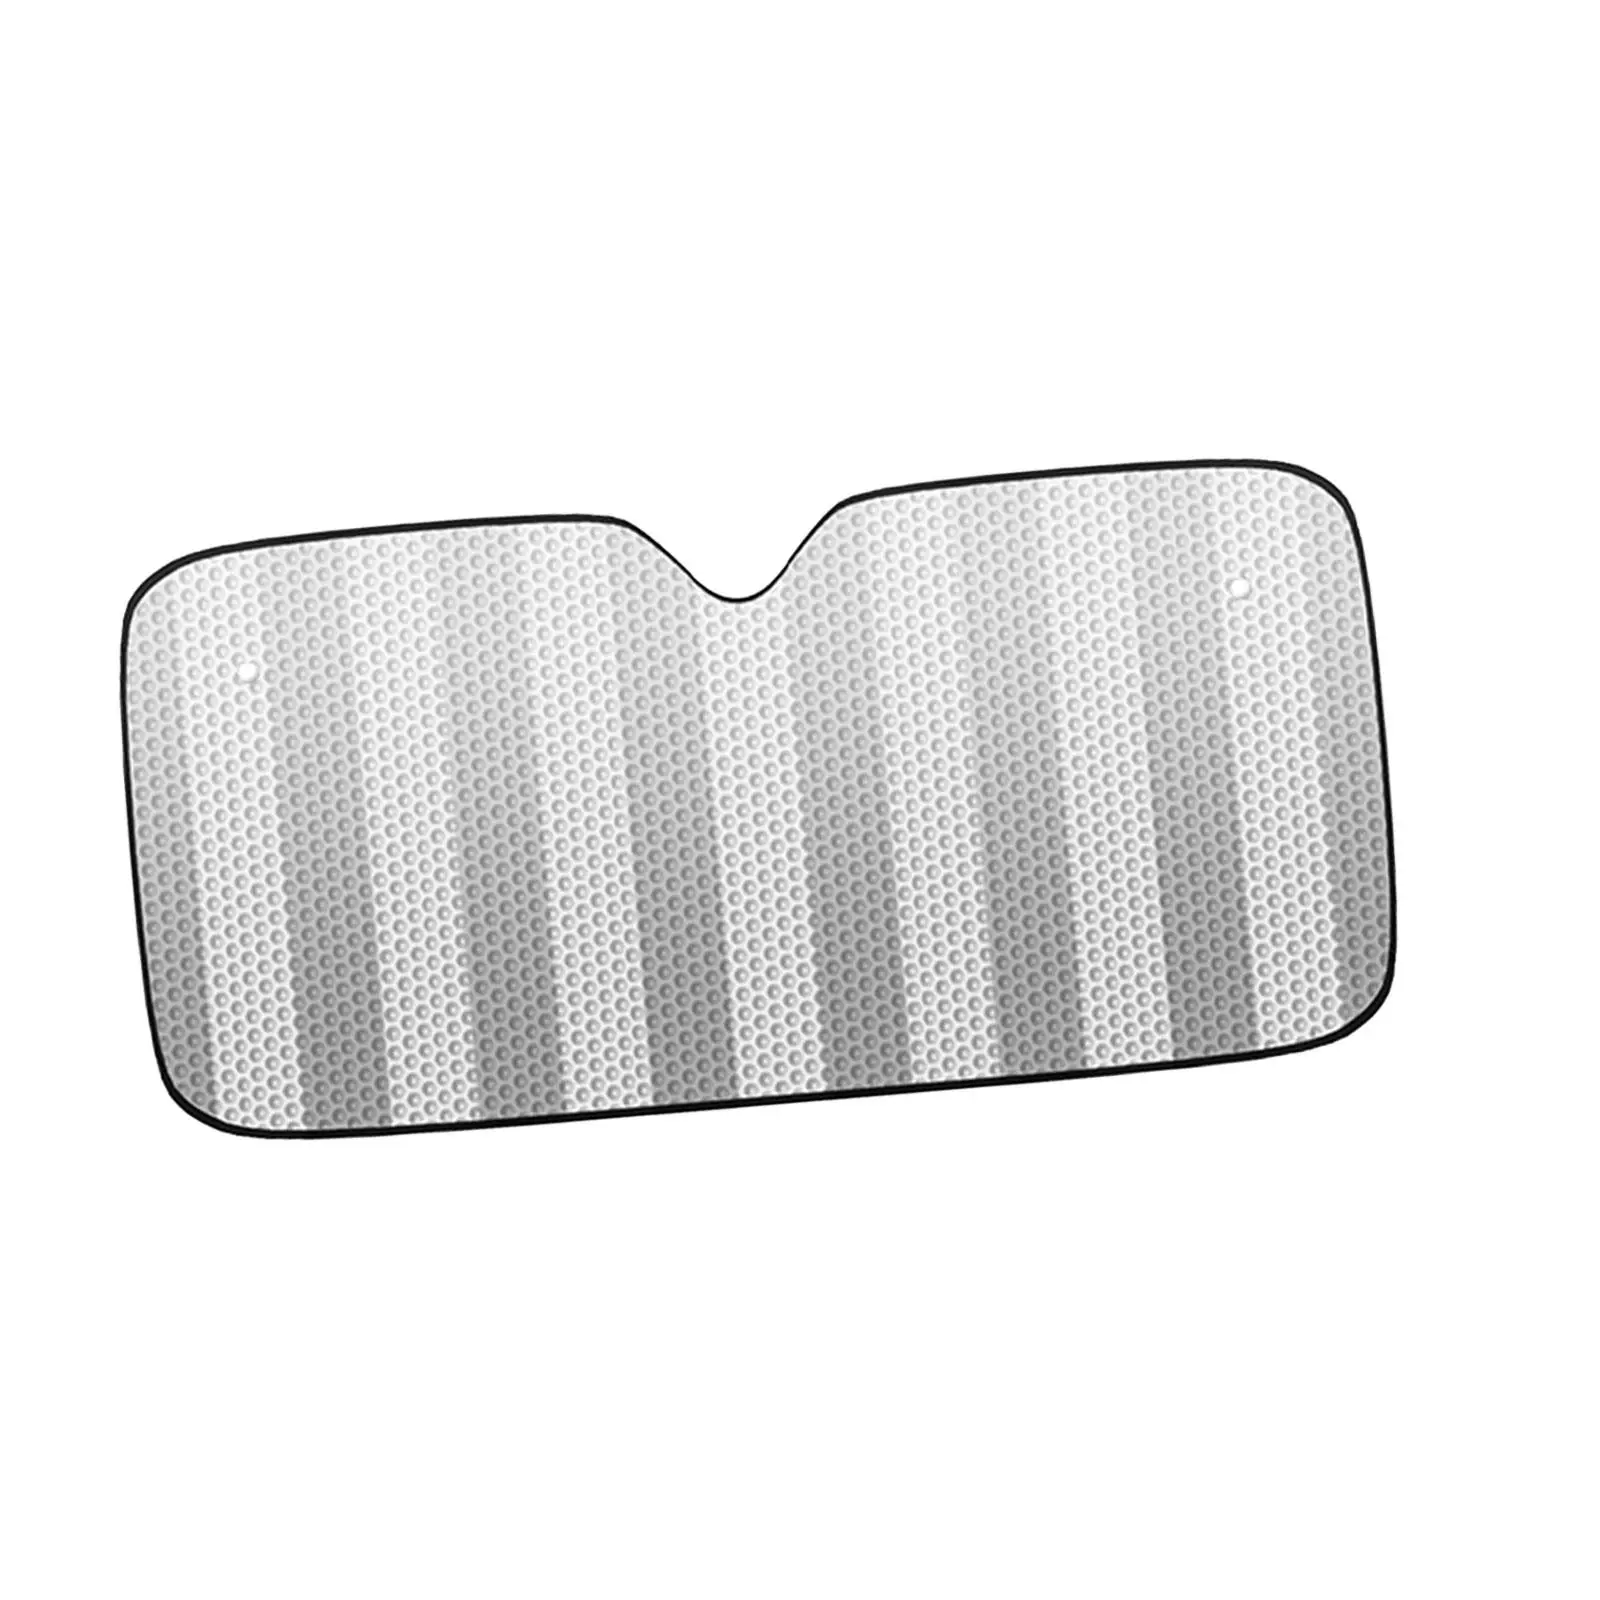 Car Window Shade Windshield Sunshade for Compact Car Most Vehicles SUV